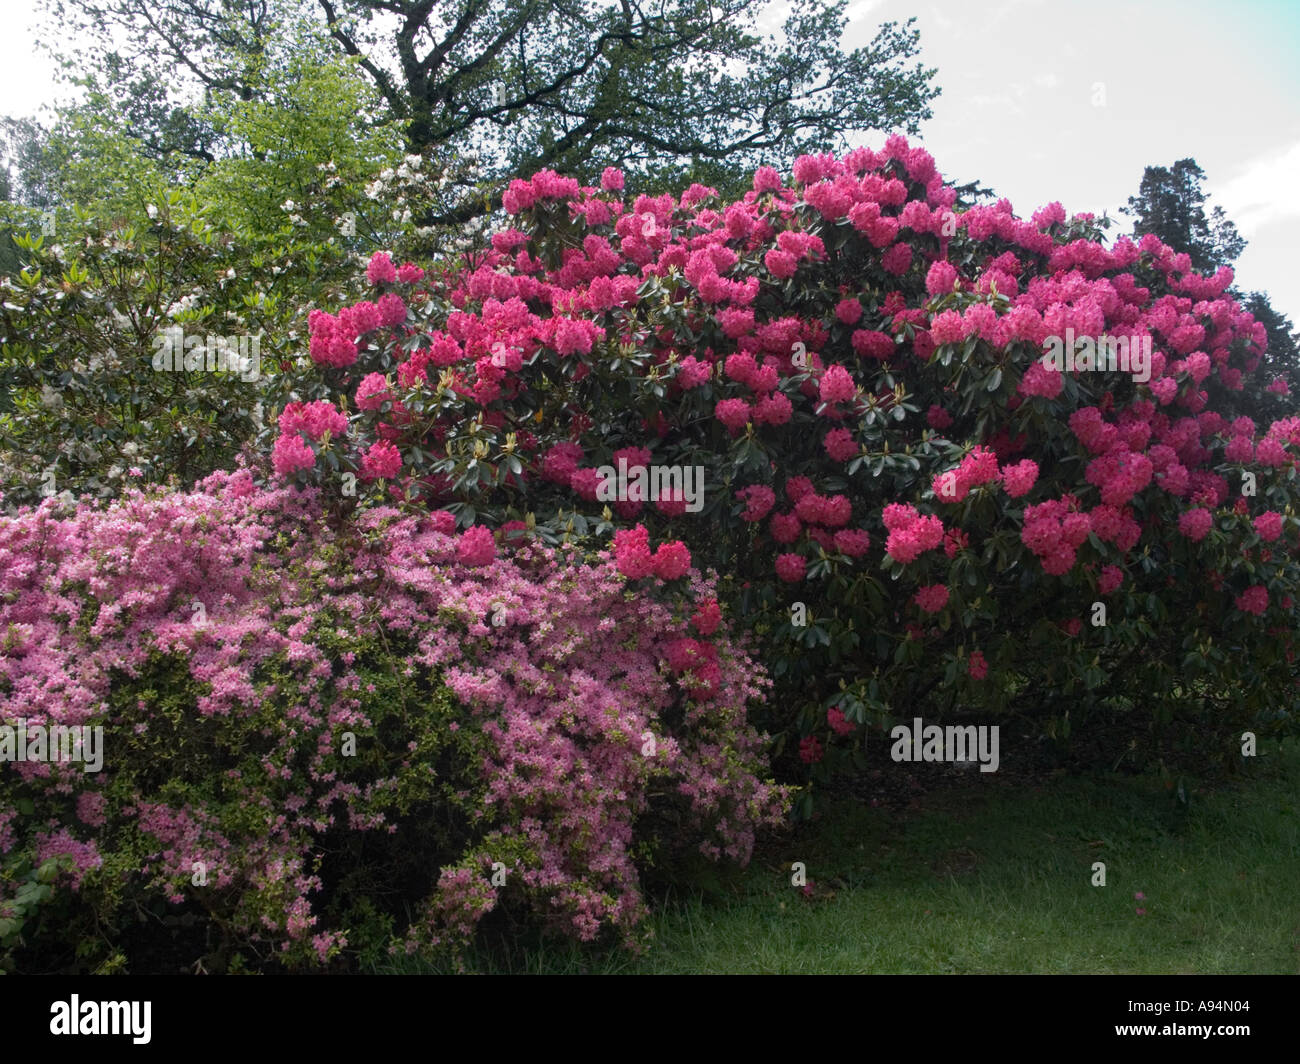 Rhododendrons Longleat Wiltshire Stock Photo